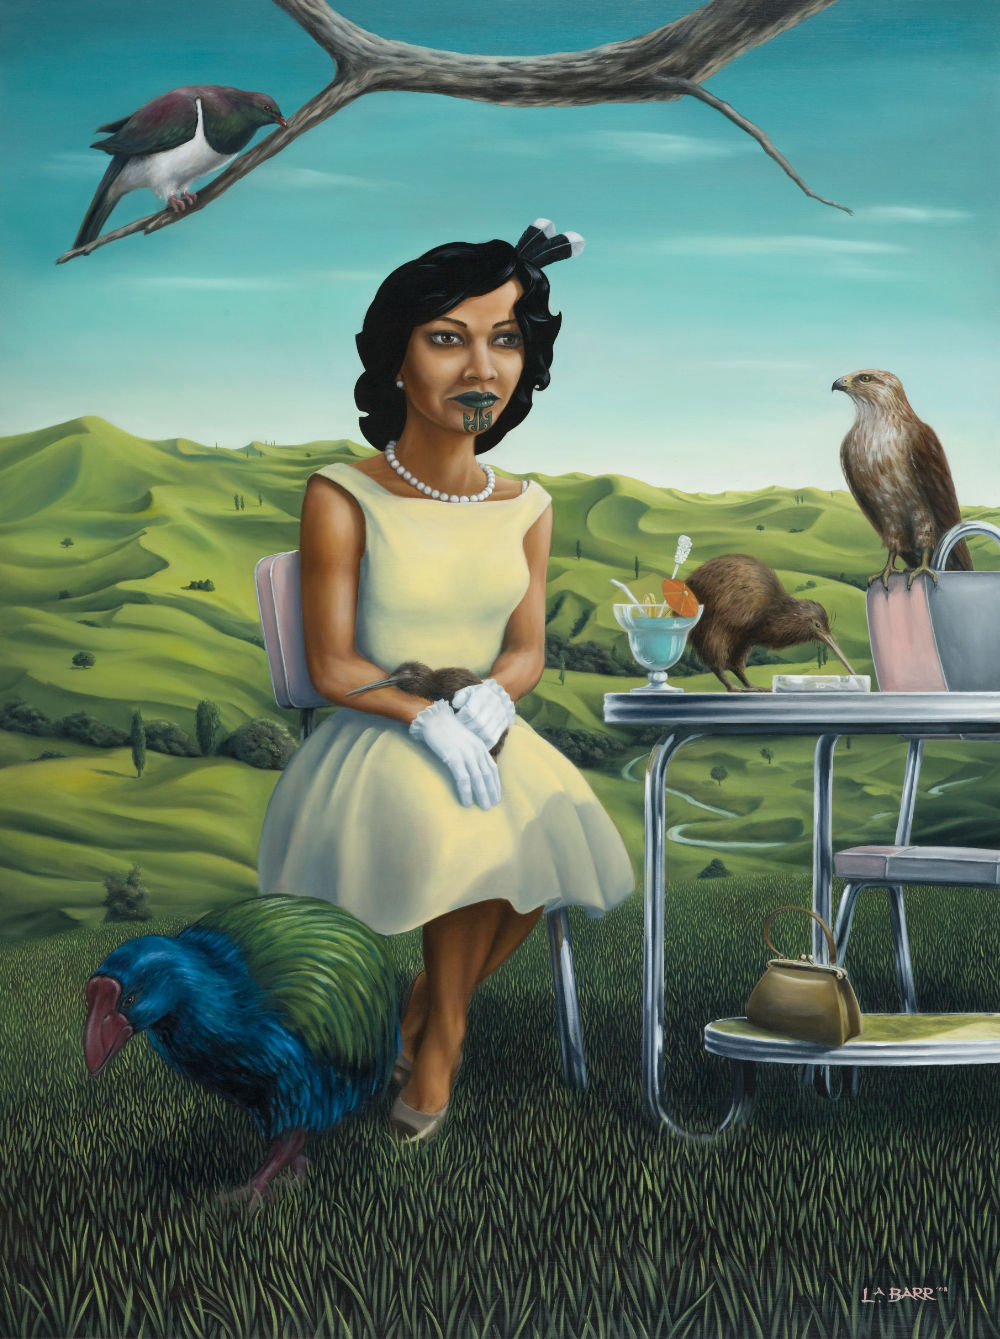 Maori woman share cocktail with native birds by Liam Barr